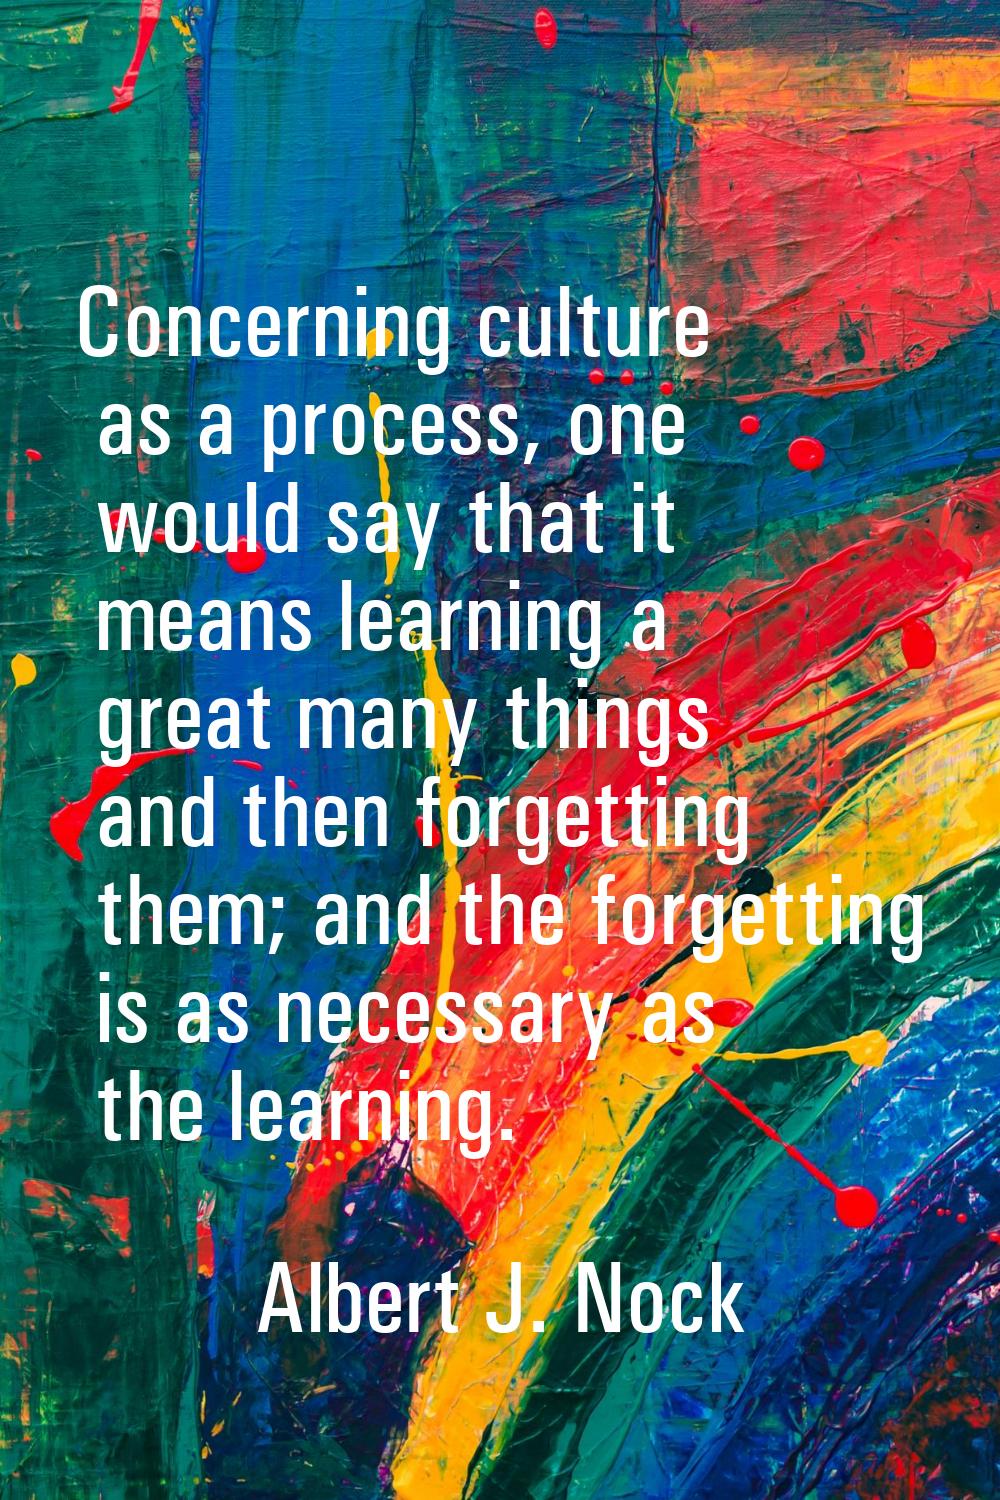 Concerning culture as a process, one would say that it means learning a great many things and then 